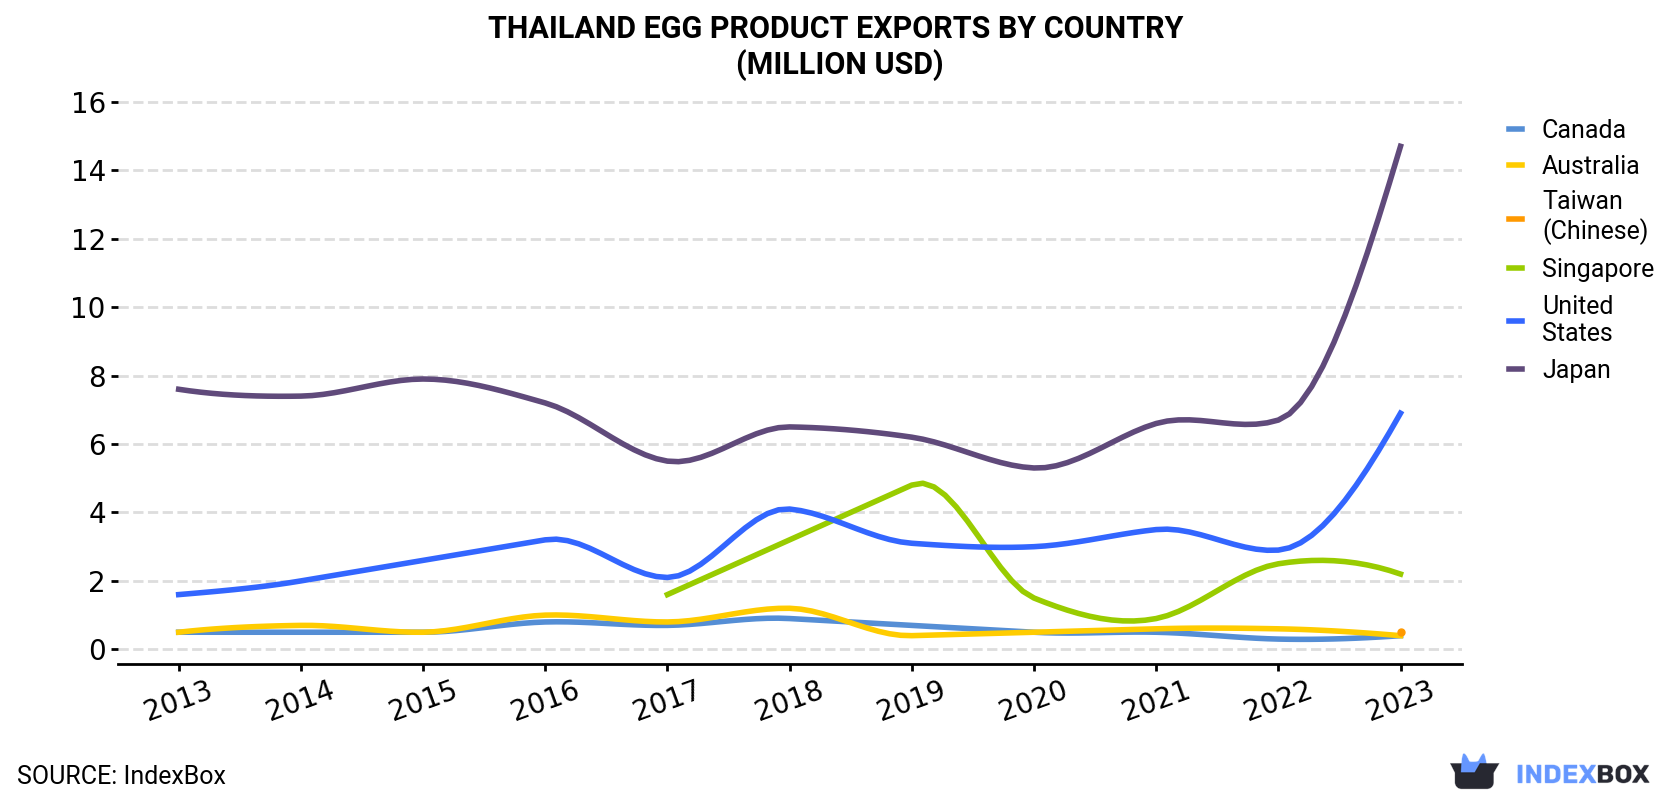 Thailand Egg Product Exports By Country (Million USD)